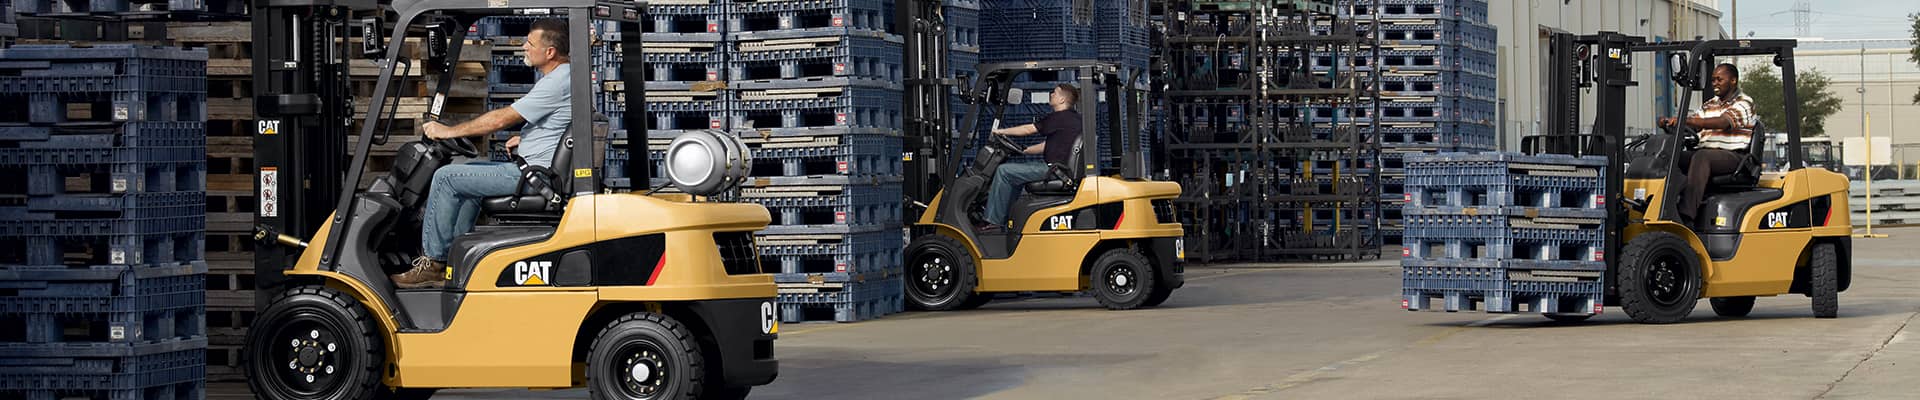 CAT Forklifts and Lift Trucks Header